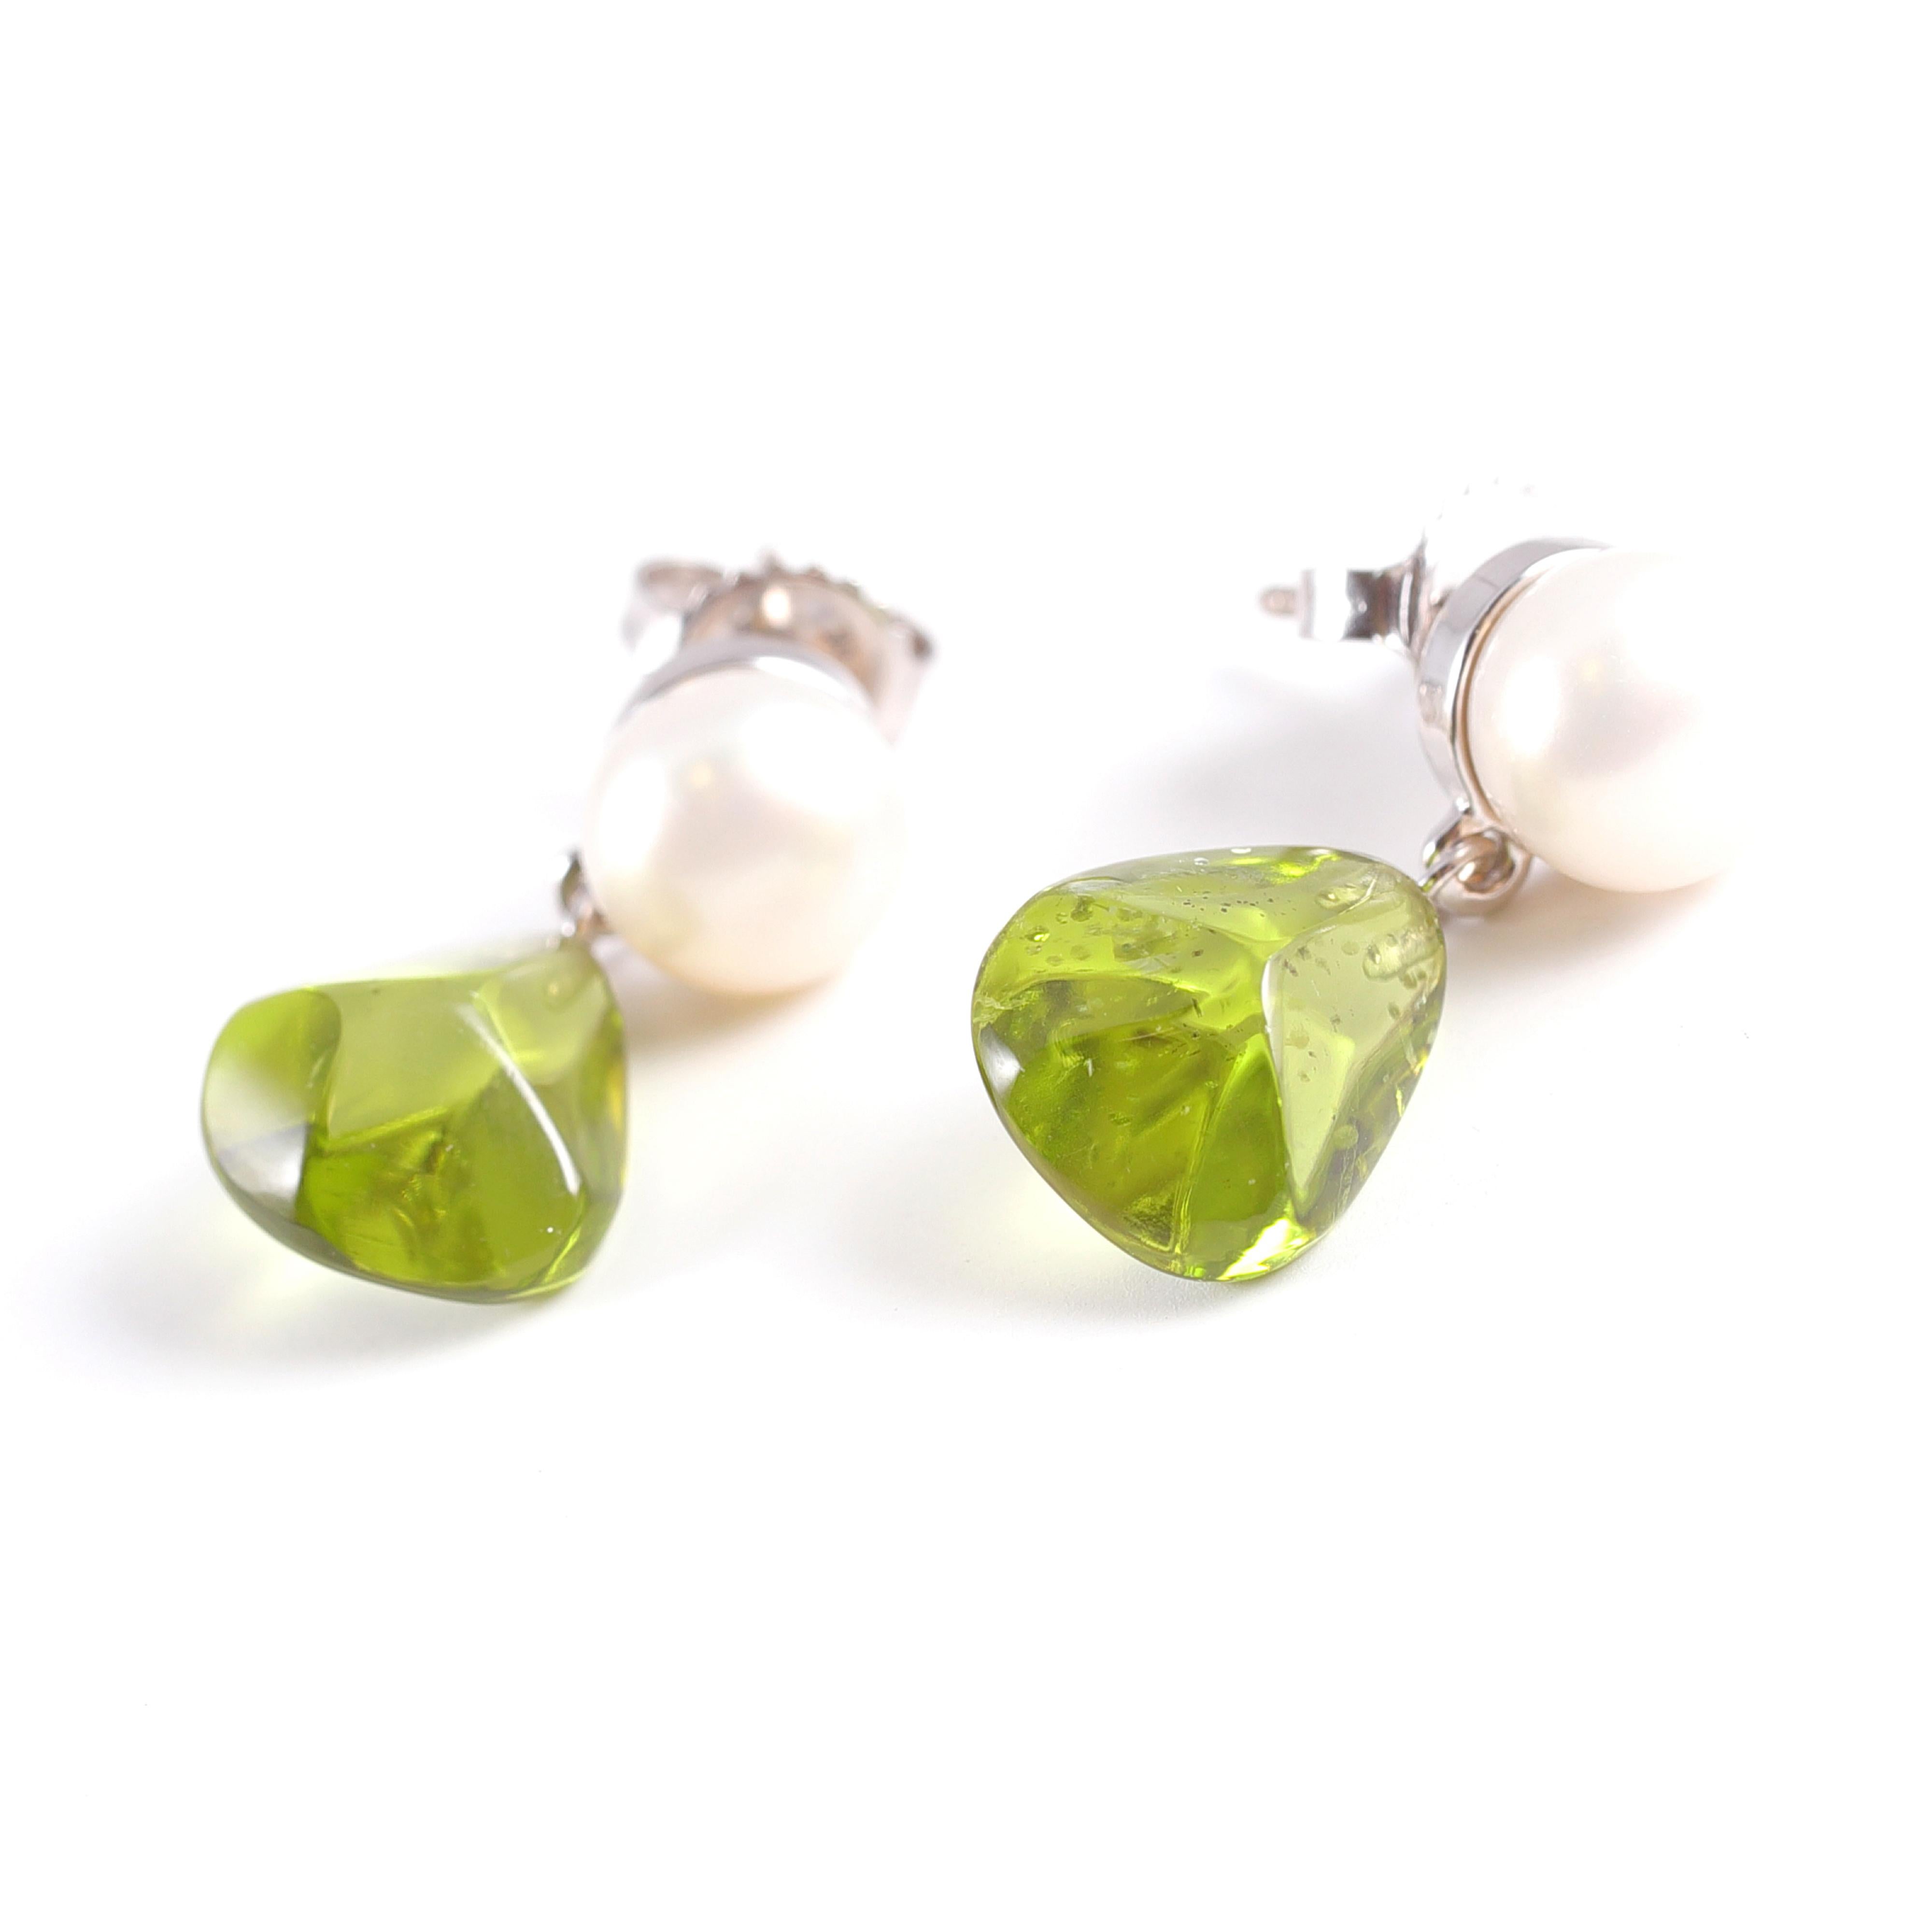 Button freshwater pearls (approximately 7.7-7.8 millimeters) with peridot drops set in 18 karat white gold by Tiffany & Co.